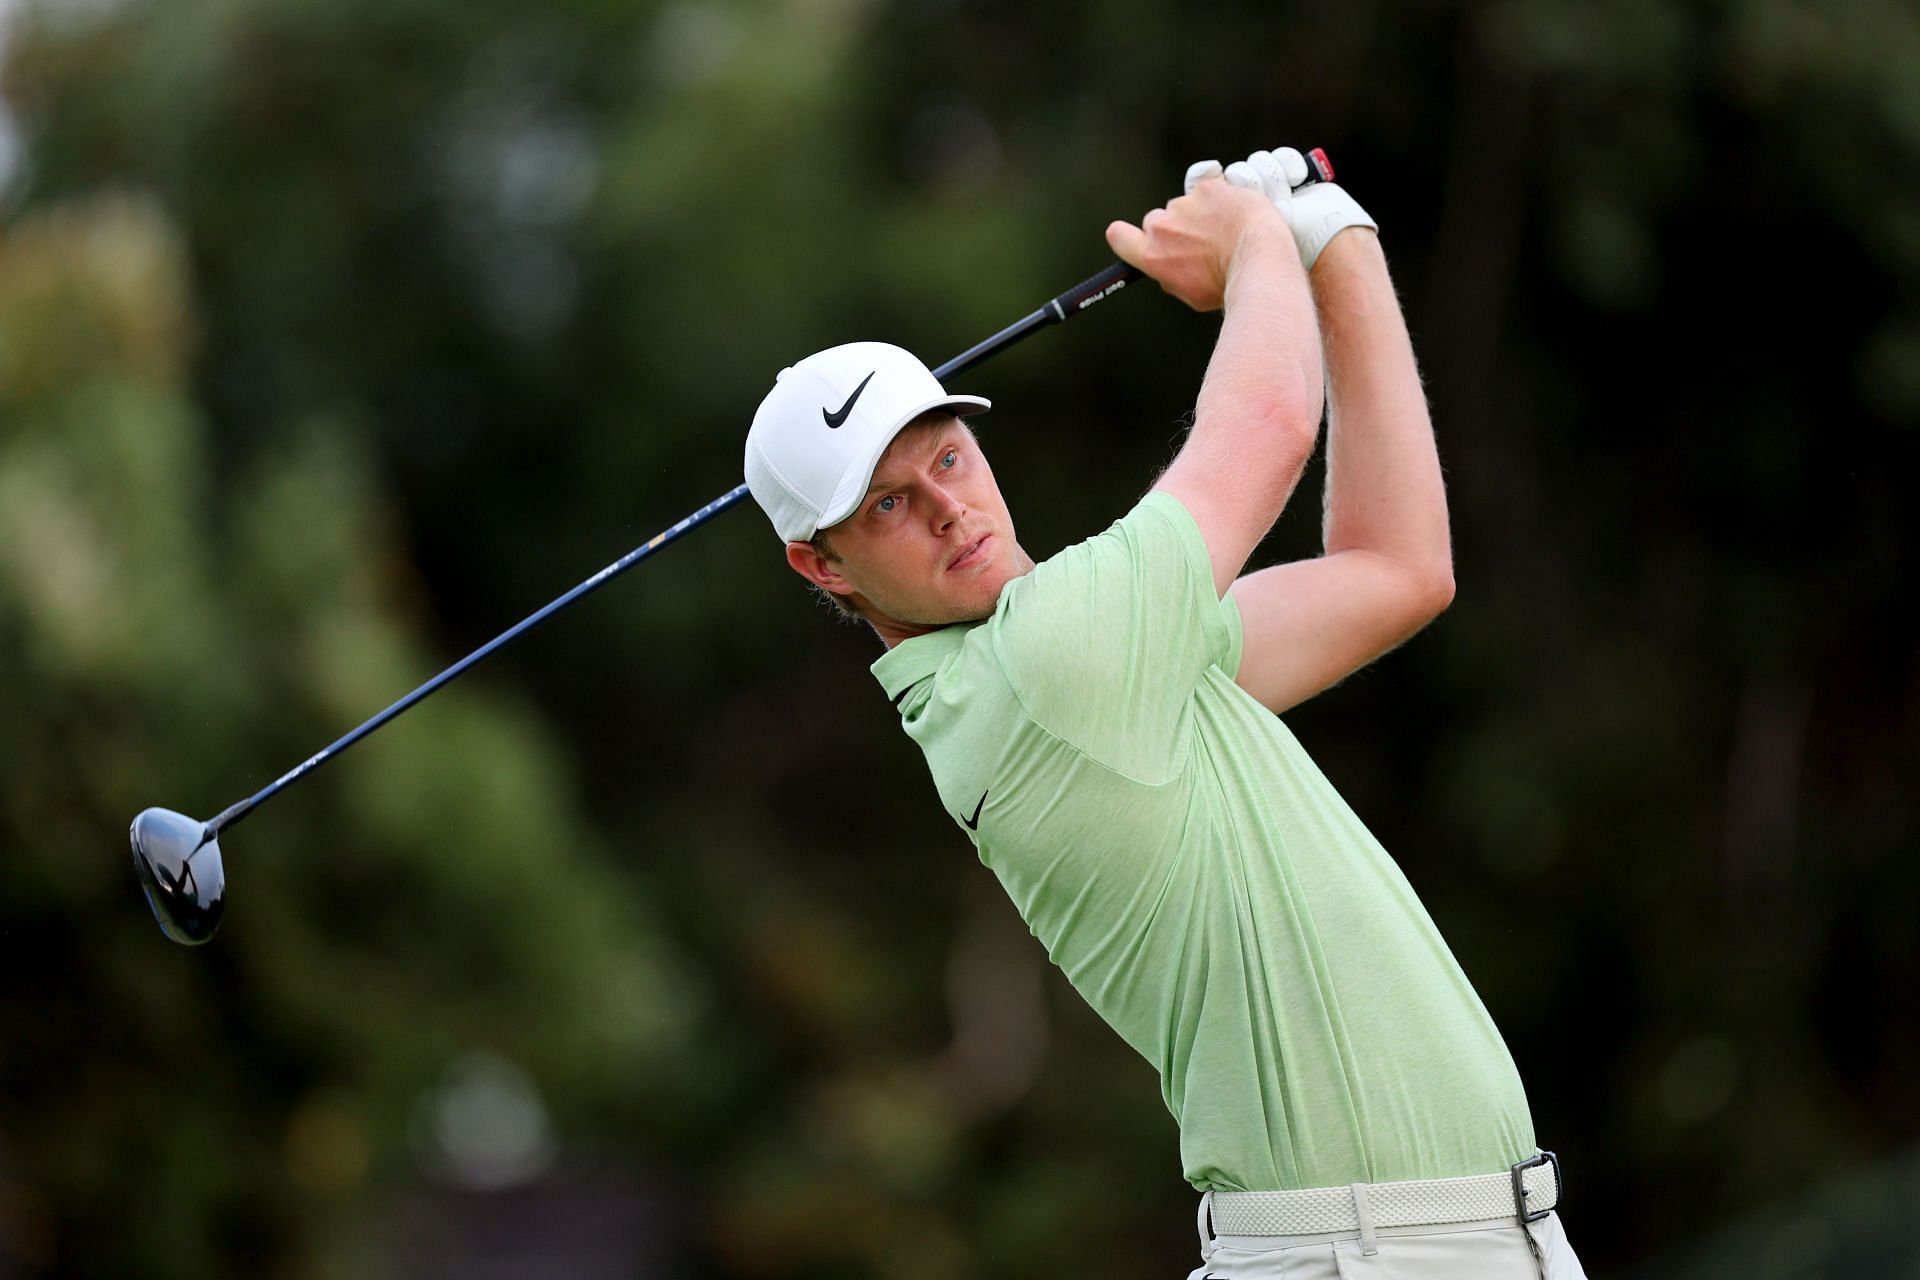 Sony Open in Hawaii - Round One